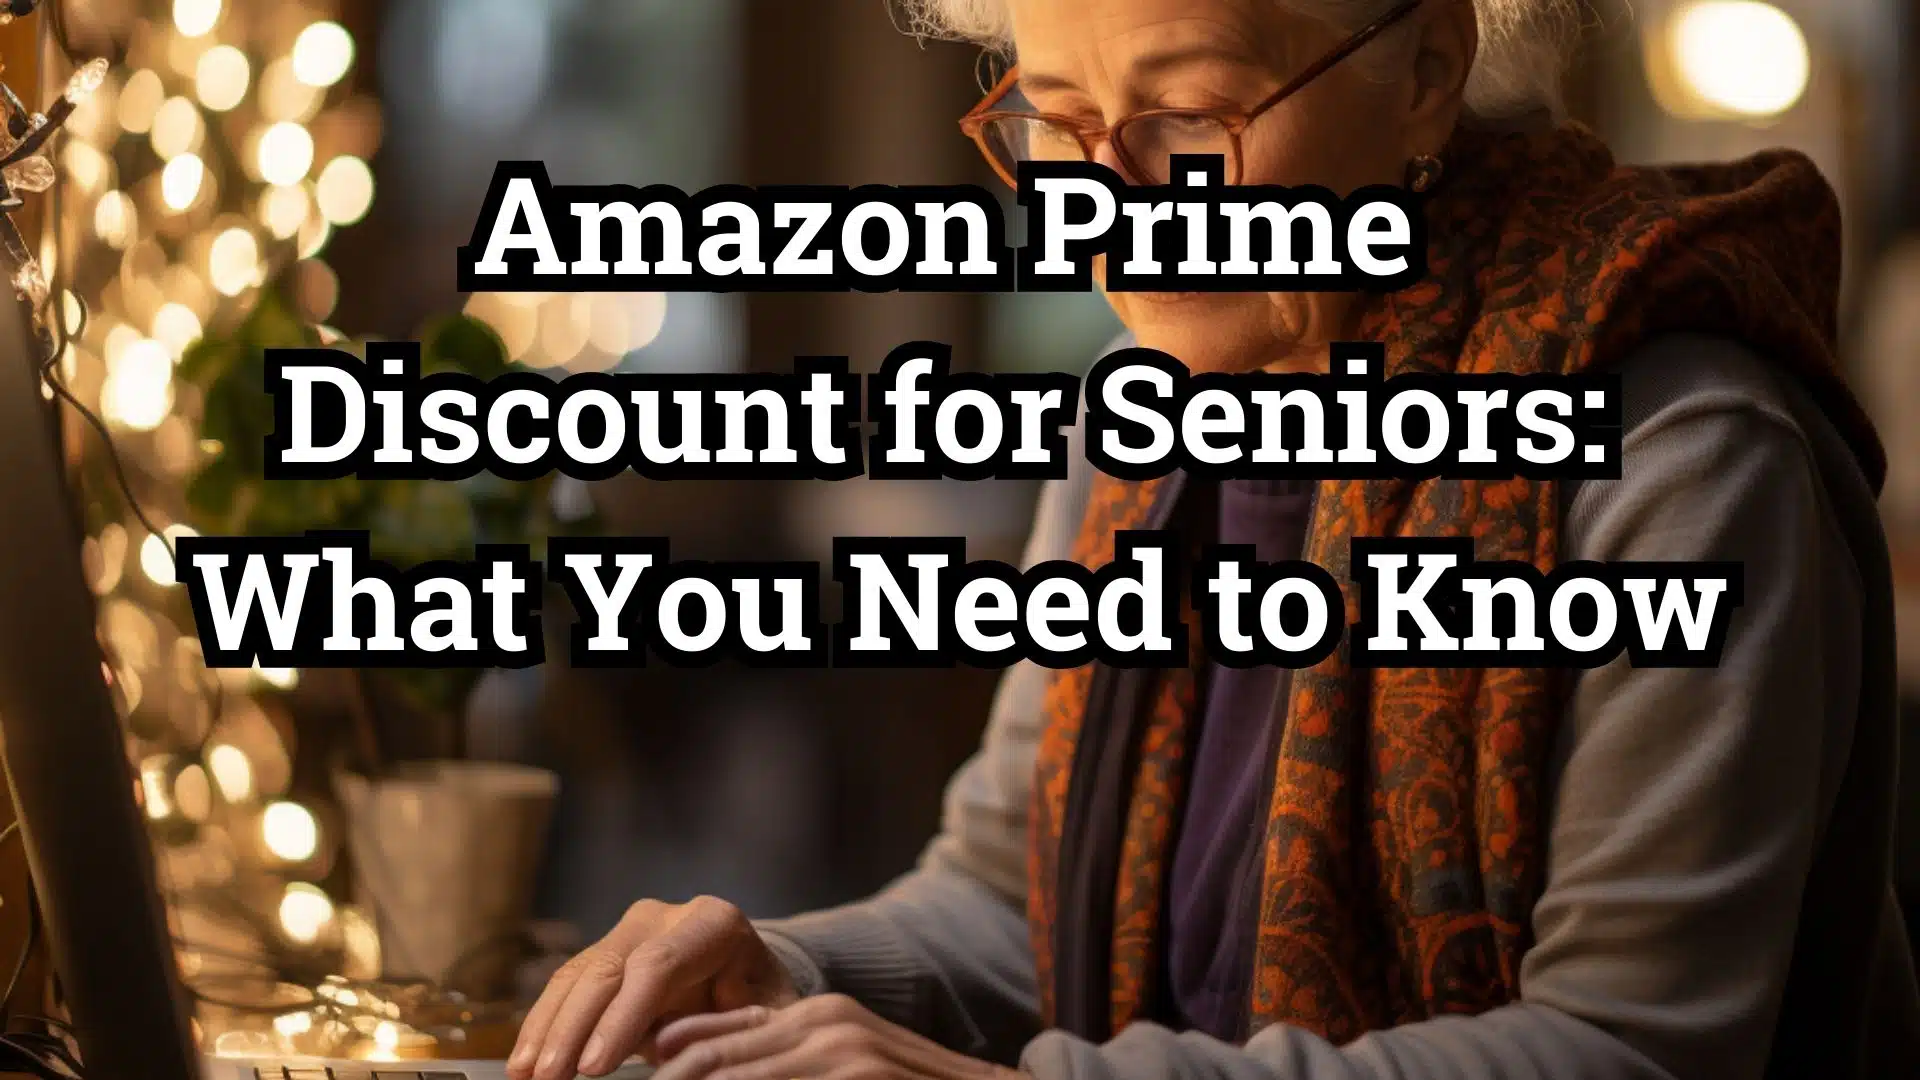 Amazon Prime Discount for Seniors What You Need to Know